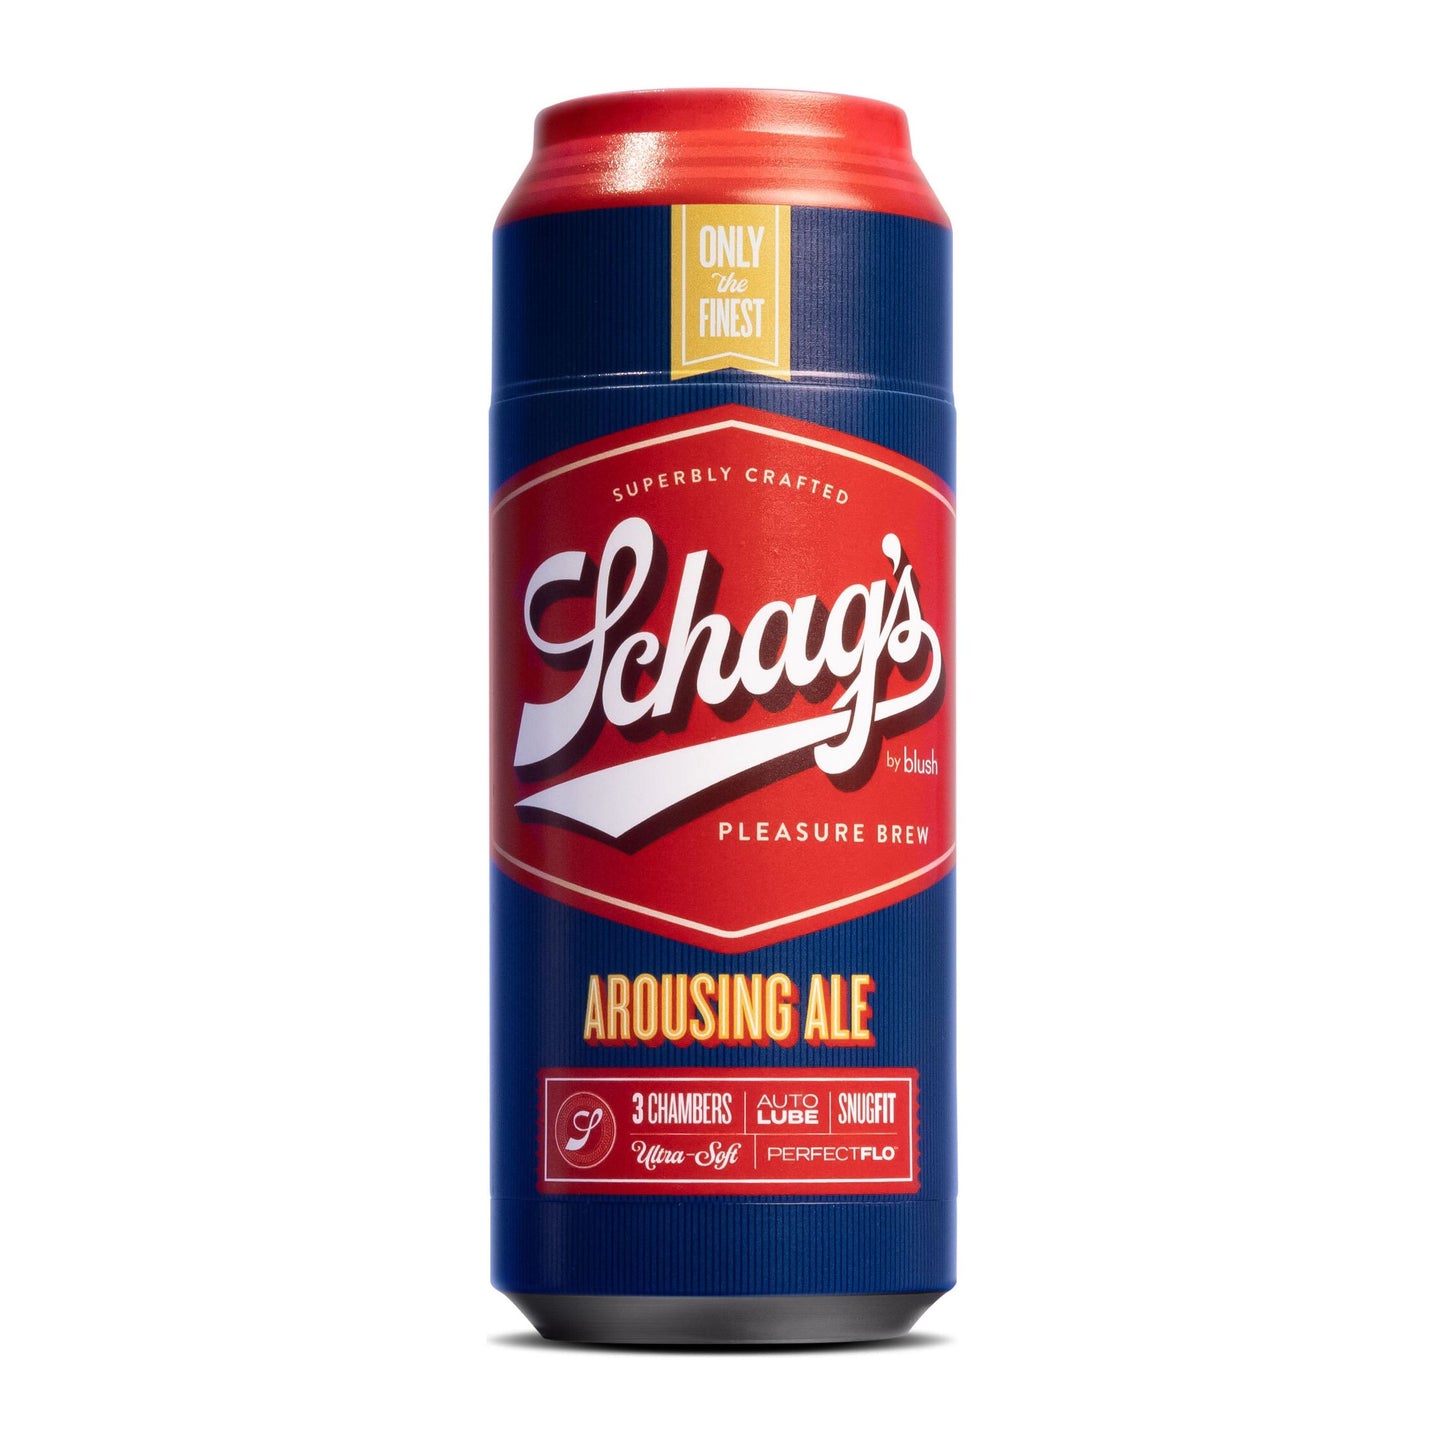 Schag's - Aurousing Ale - Frosted BL-83119